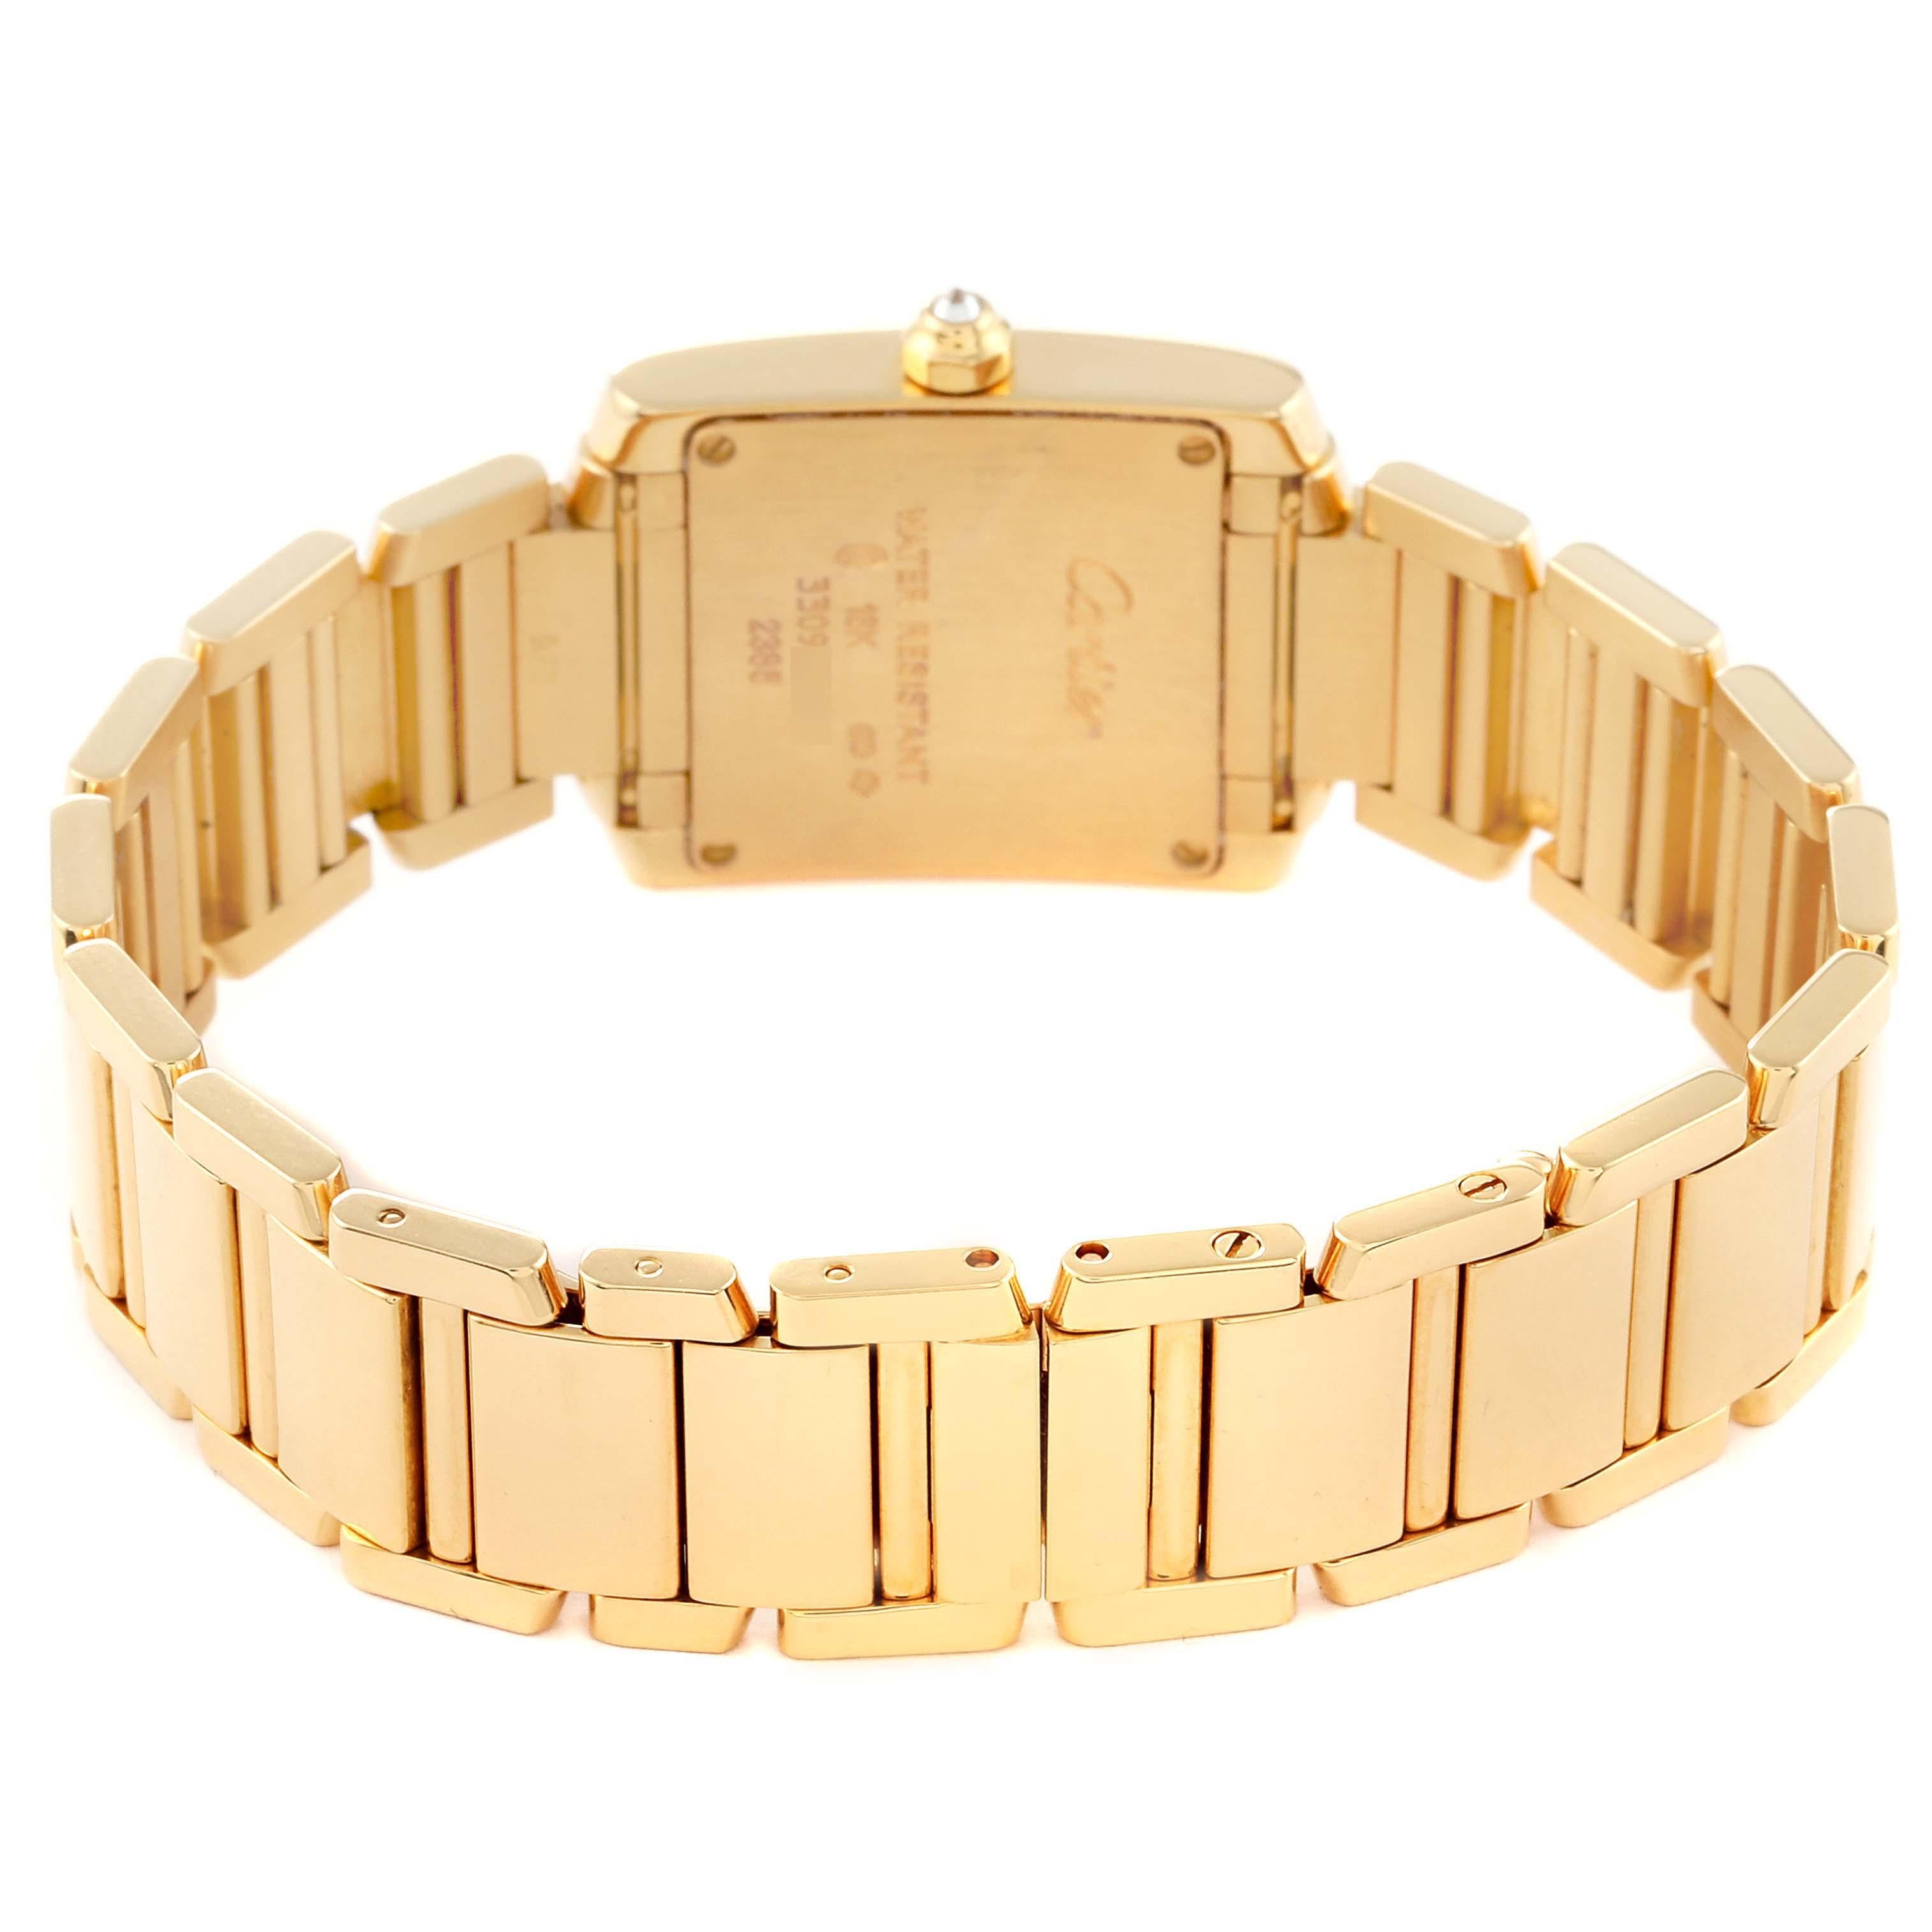 Cartier Tank Francaise Yellow Gold Rose Dial Diamond Ladies Watch WE1021R8 3